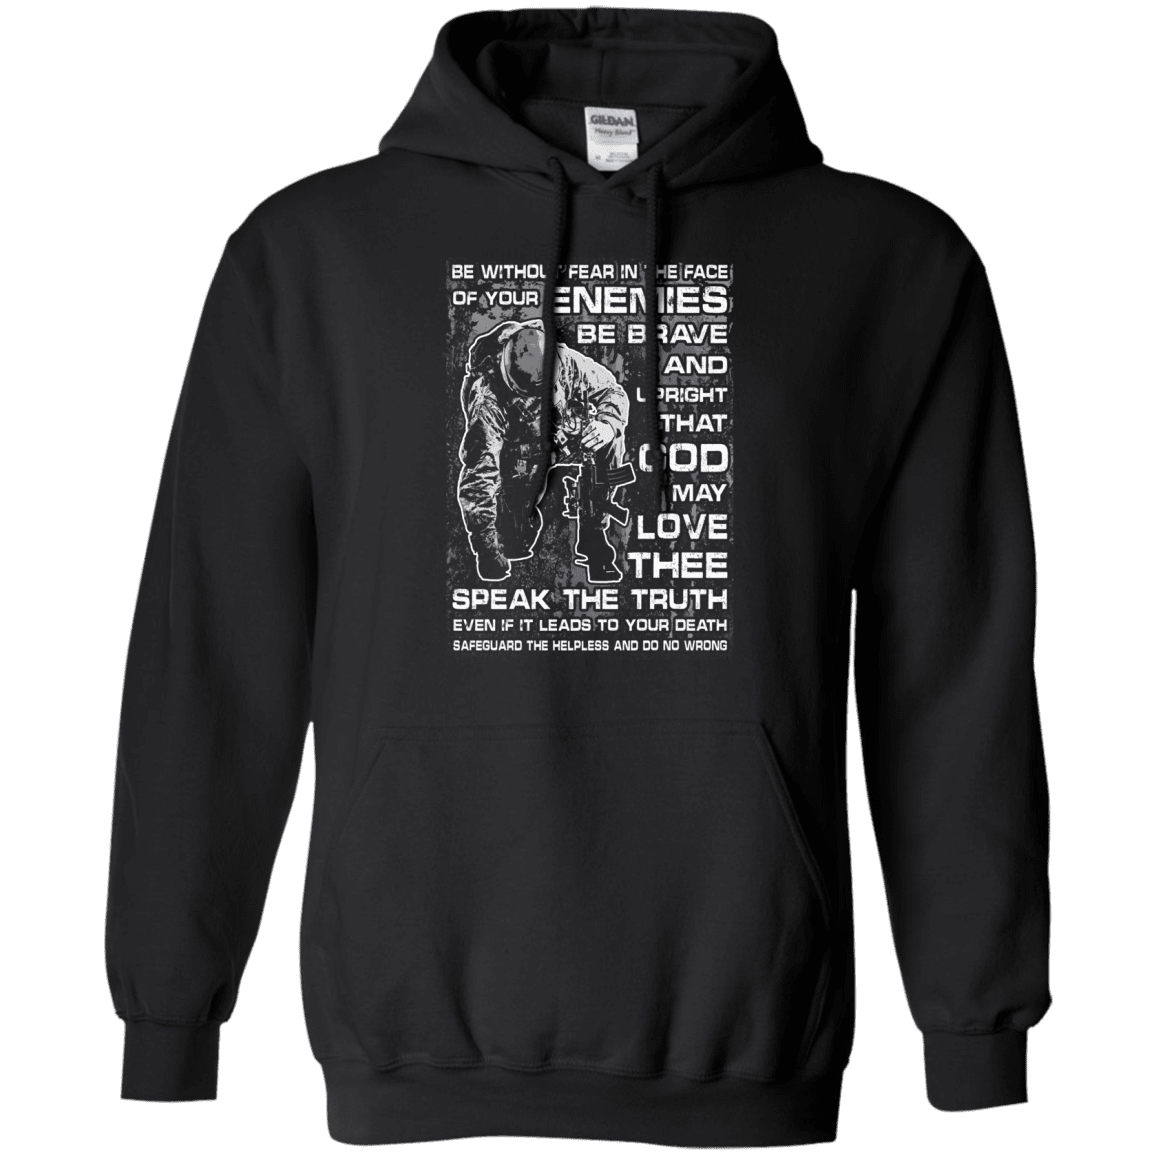 Military T-Shirt "Be without Fear in The Face Men" Front-TShirt-General-Veterans Nation